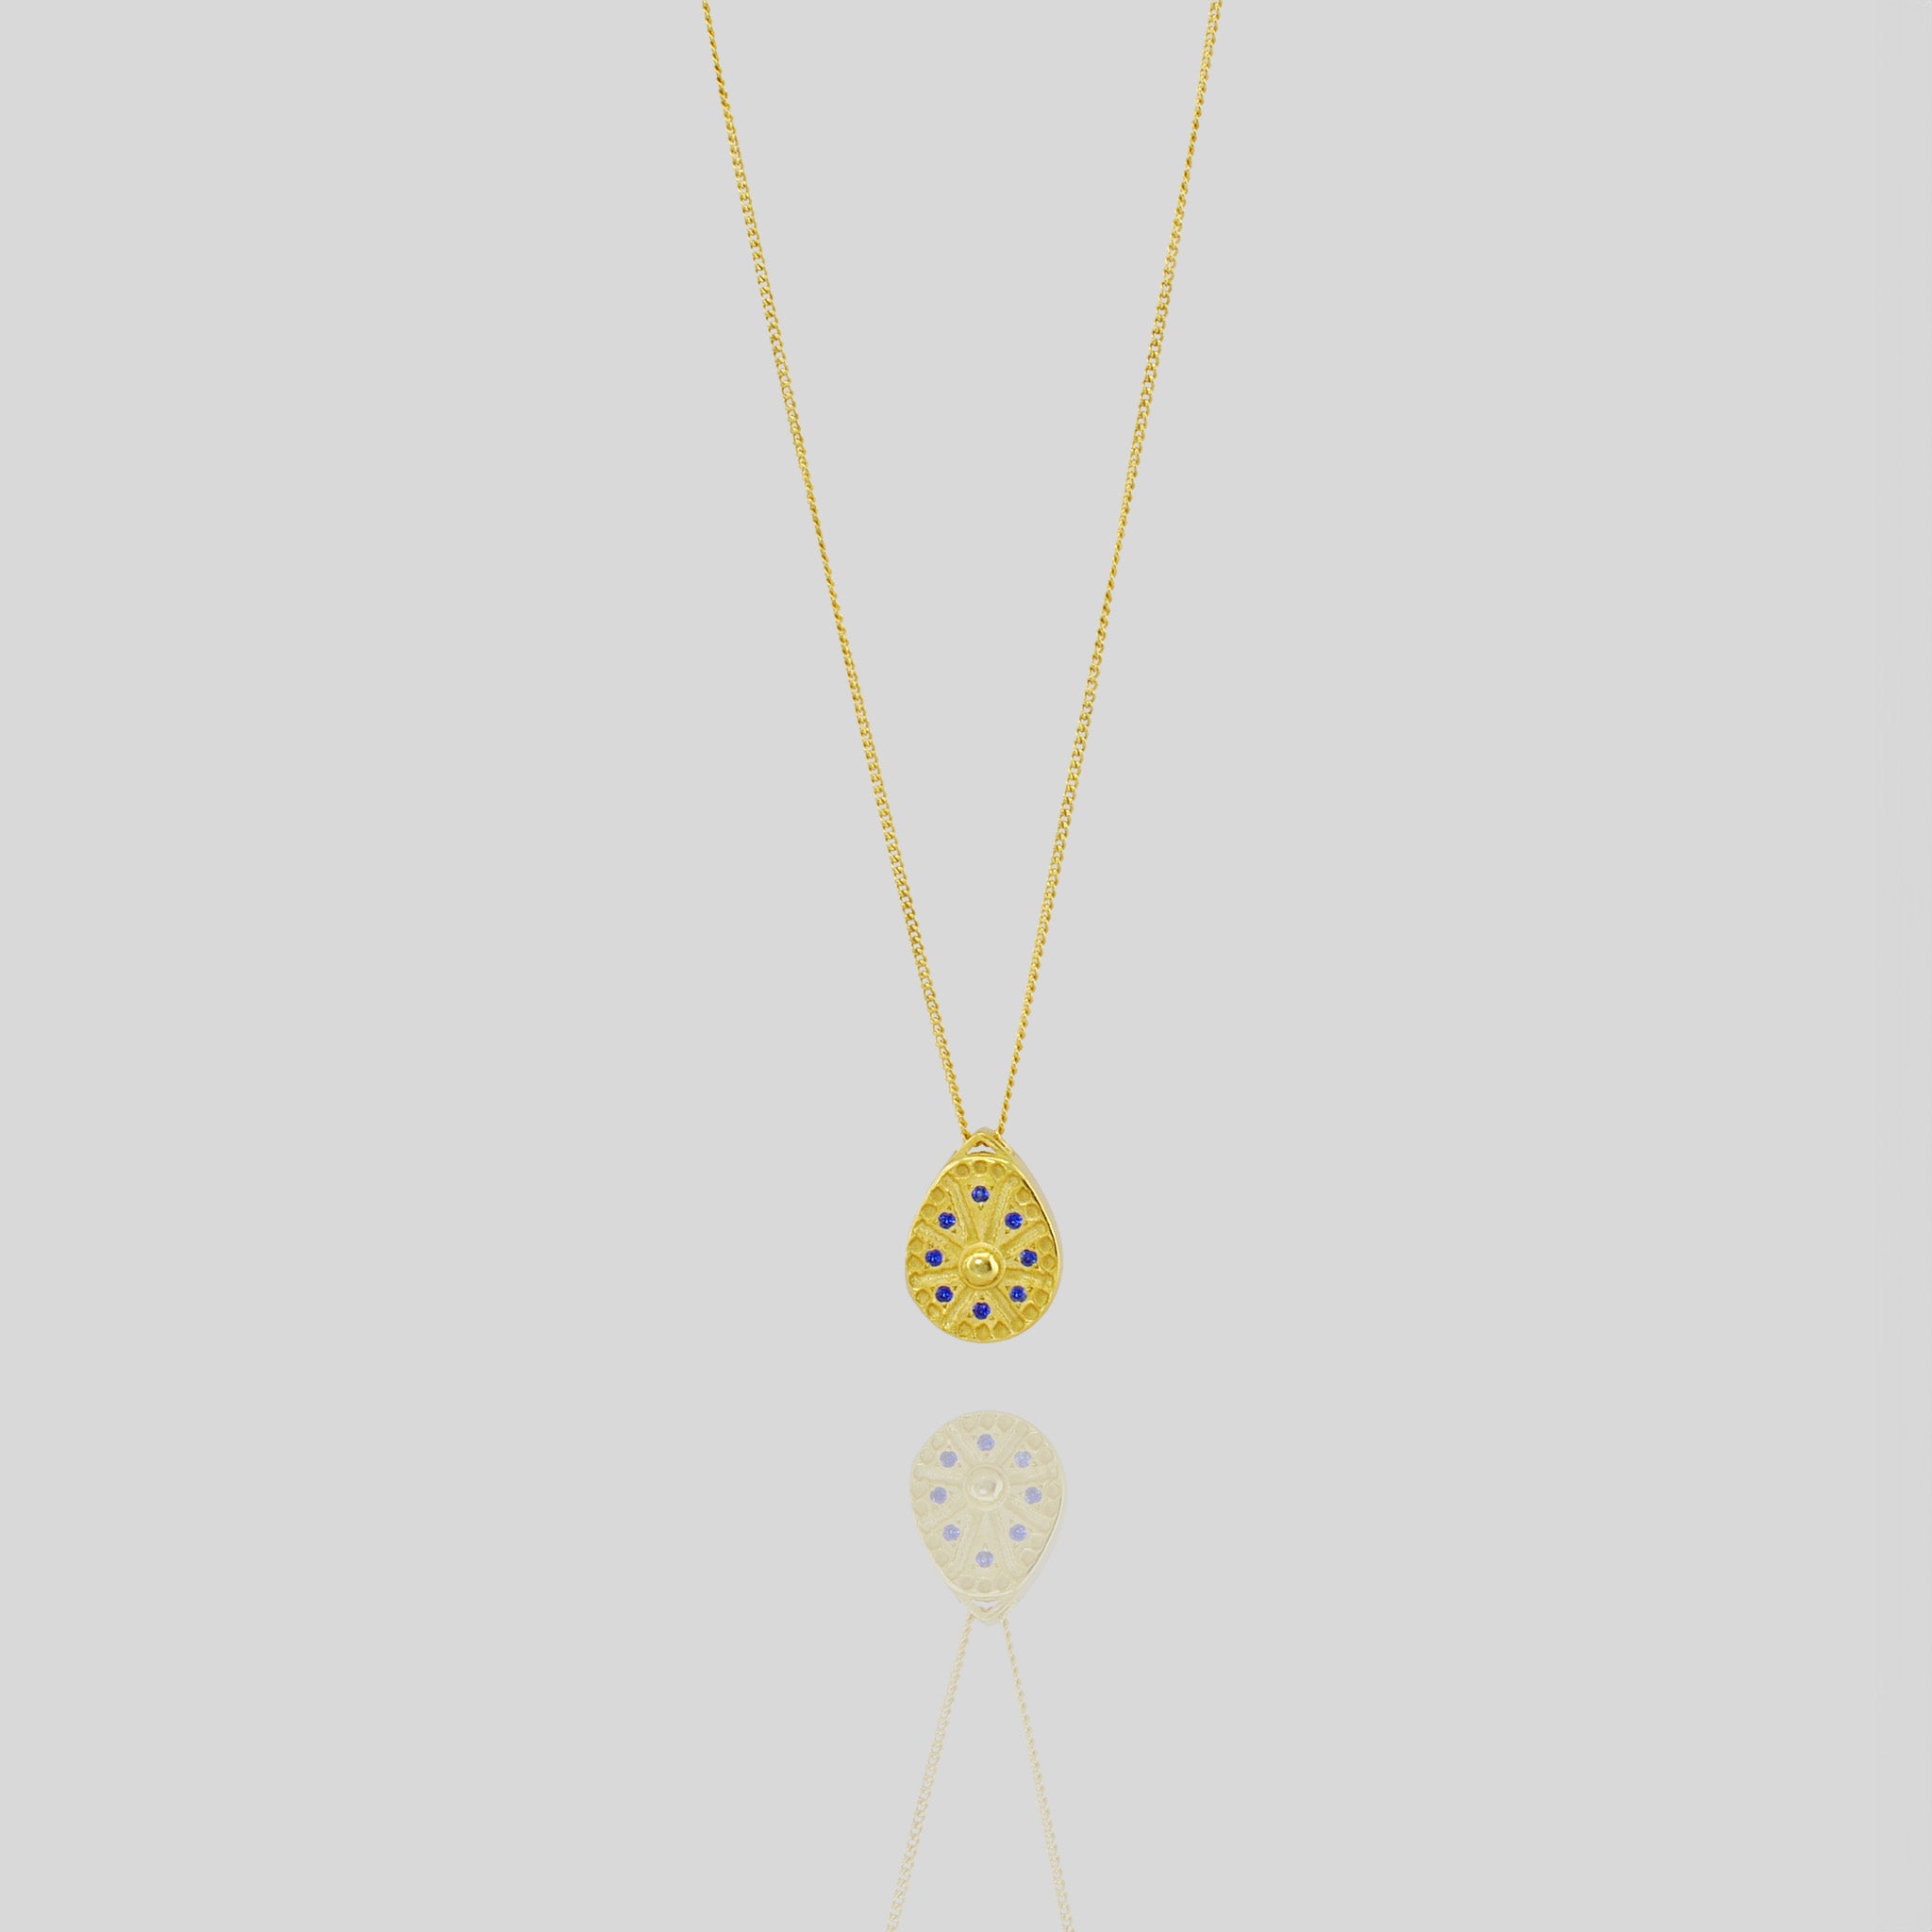 18k Gold pendant resembling a Sundial clock, accented with small Sapphires between the edges of each clock hand. A luxurious and timeless addition to any collection.